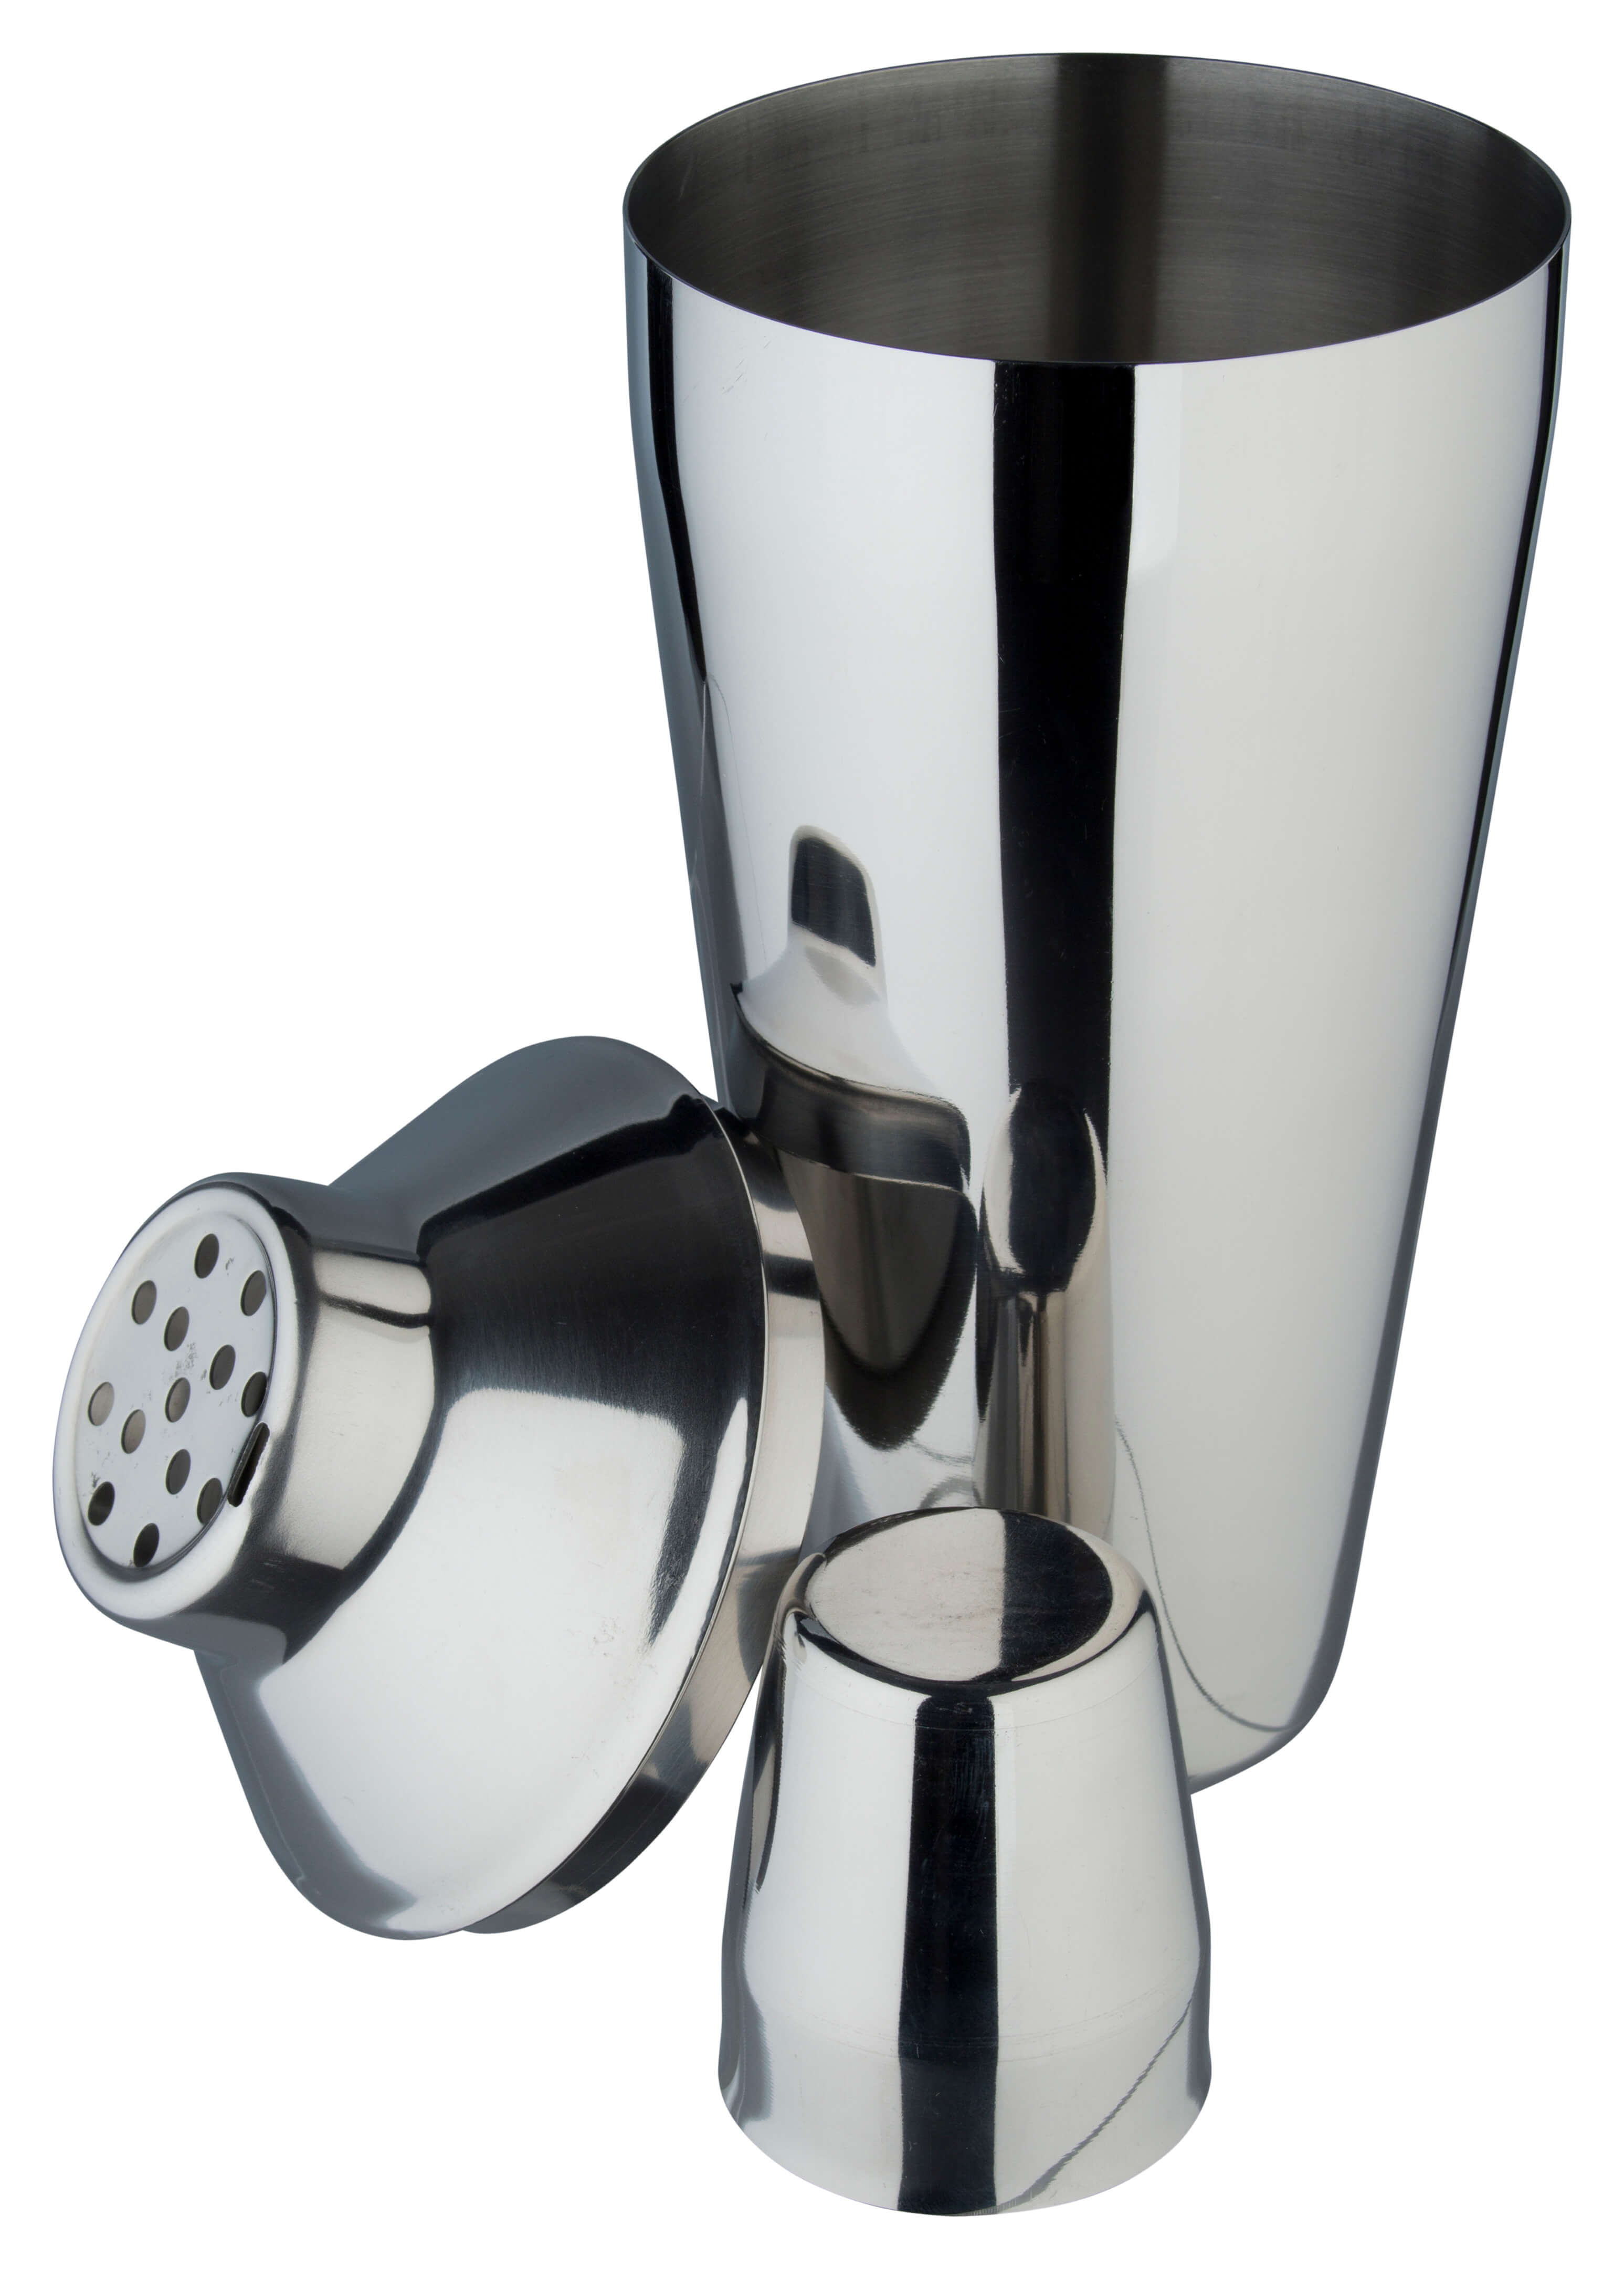 Cocktail shaker, stainless steel, tripartite, polished (750ml)